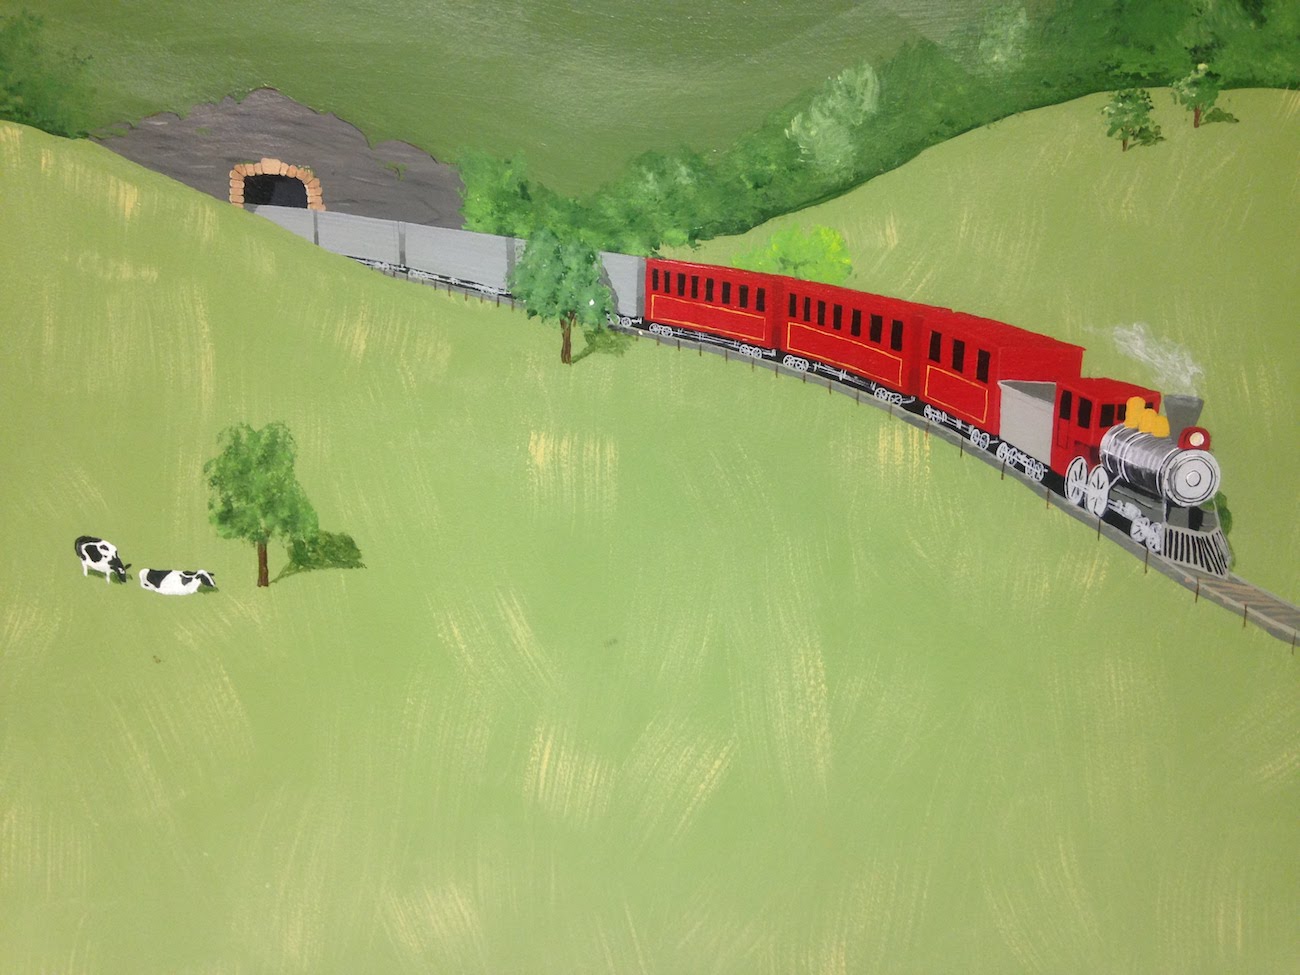 Mural of a red train coming out of a tunnel in a hillside in a field with cows.